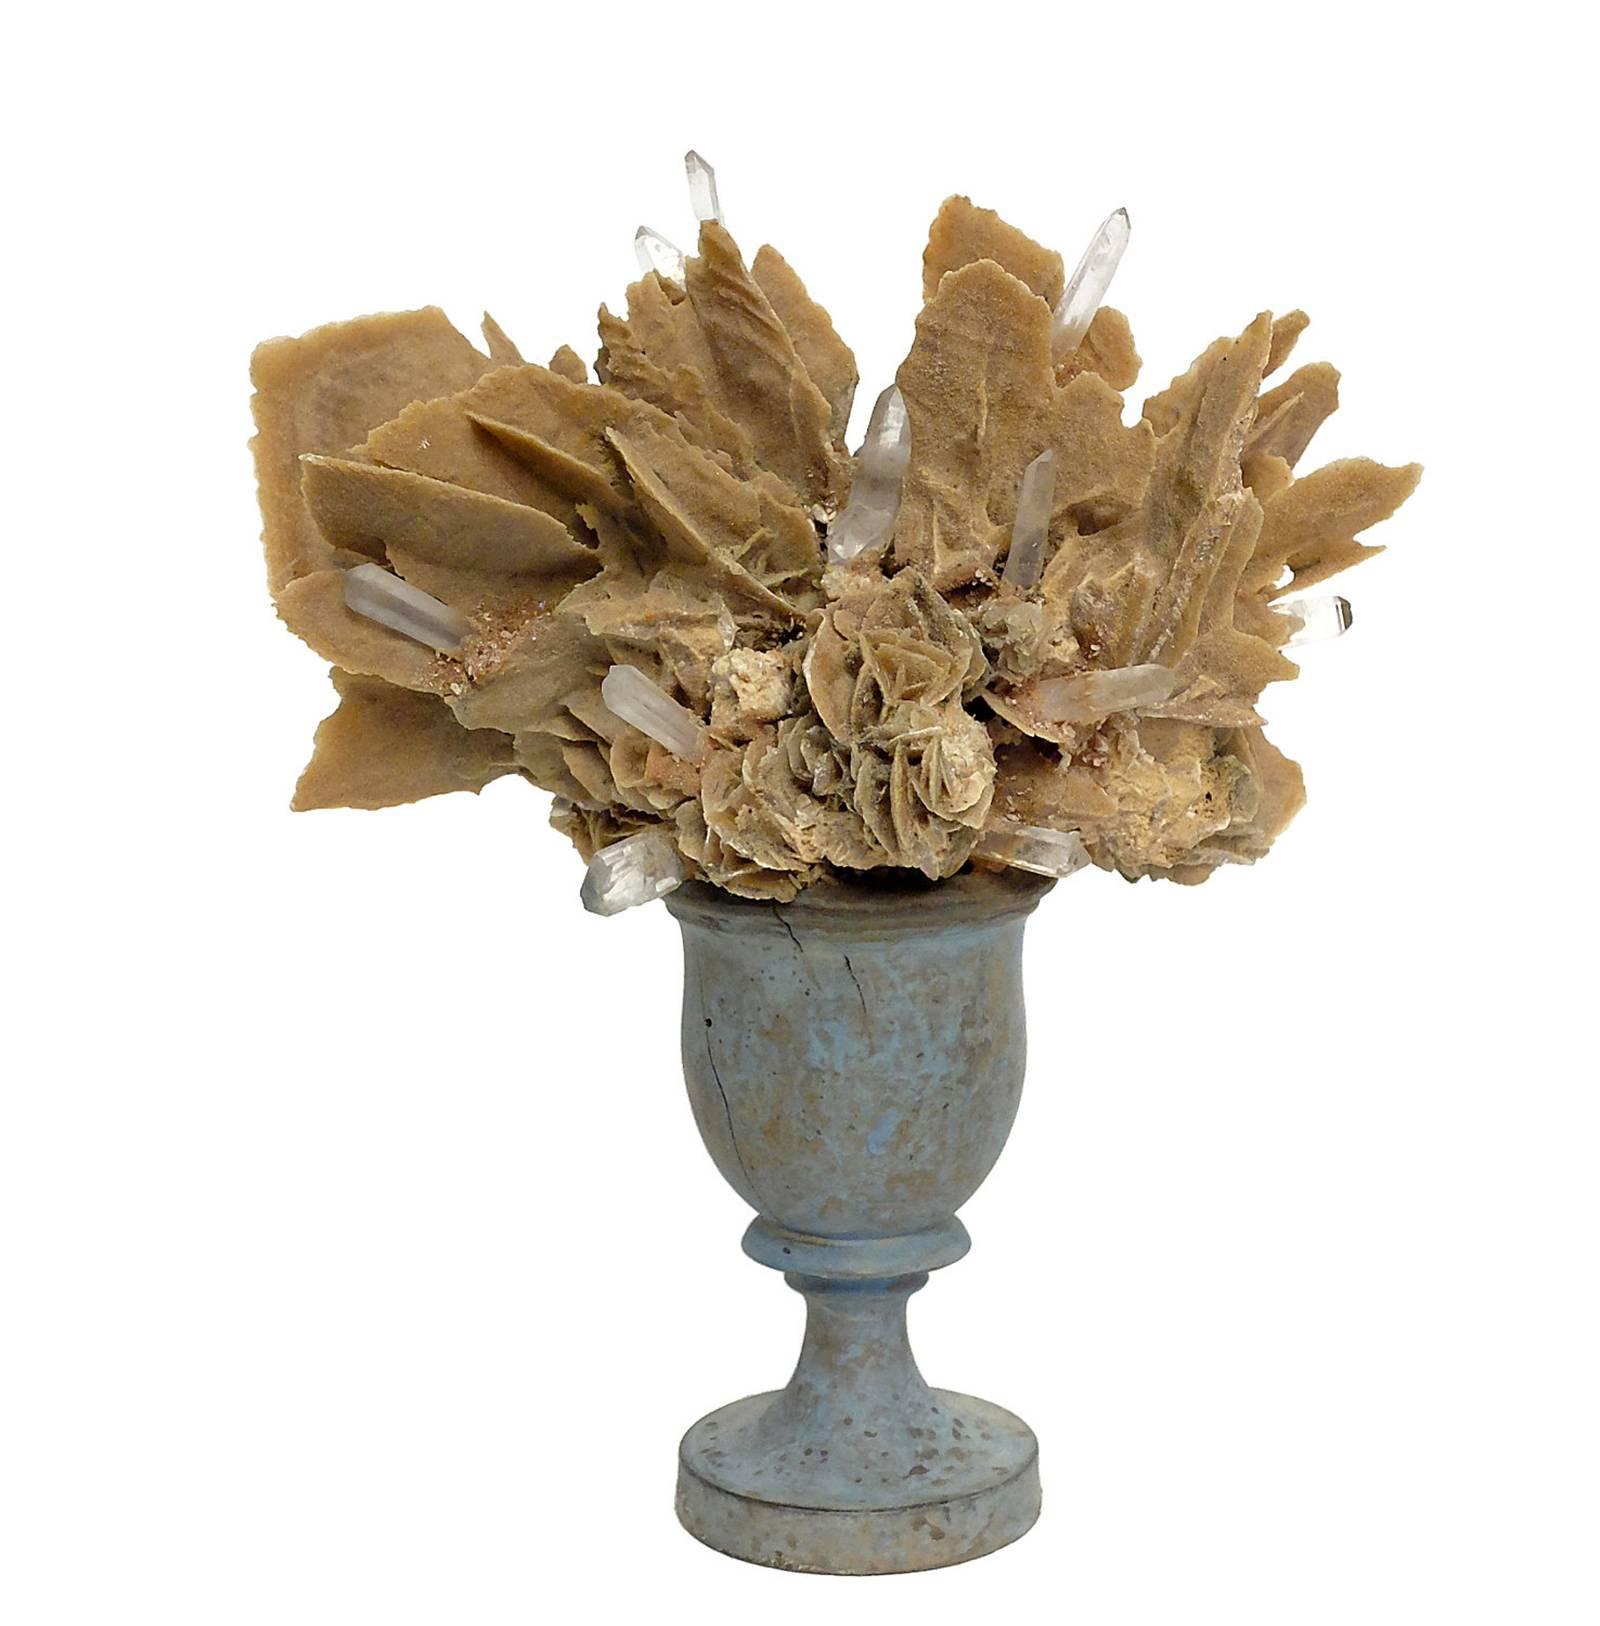 A Naturalia mineral specimen a pair of desert rose crystals and rock crystals, mounted over light blue wooden bases, in a shape of a vases.